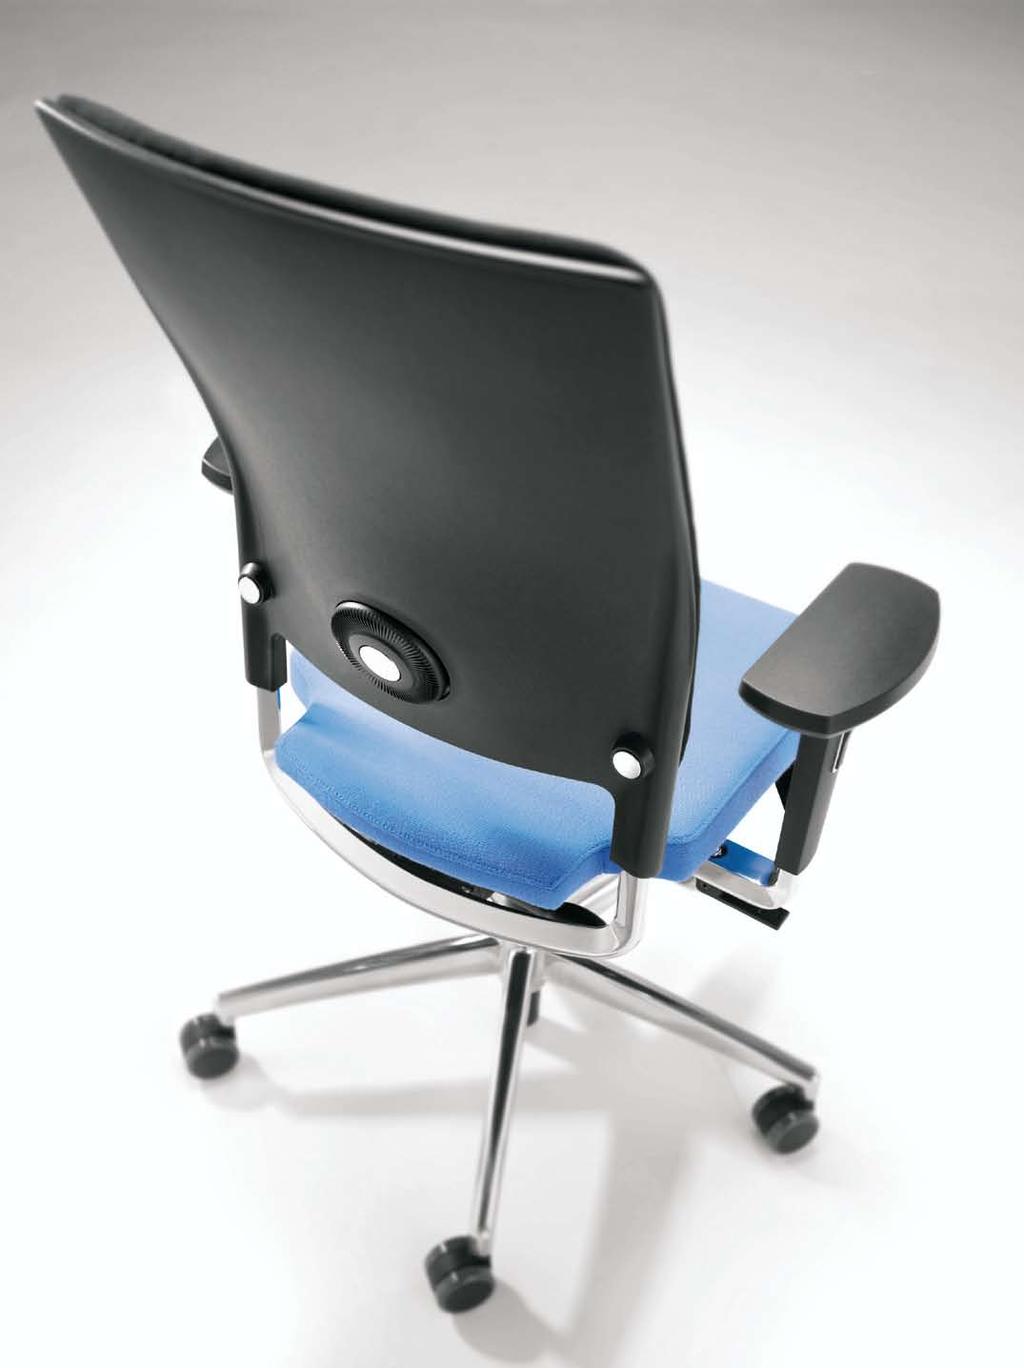 The seat of the NPR model is designed so that the seat can be adjusted within a 10 cm range (seat depth 38-48 cm).